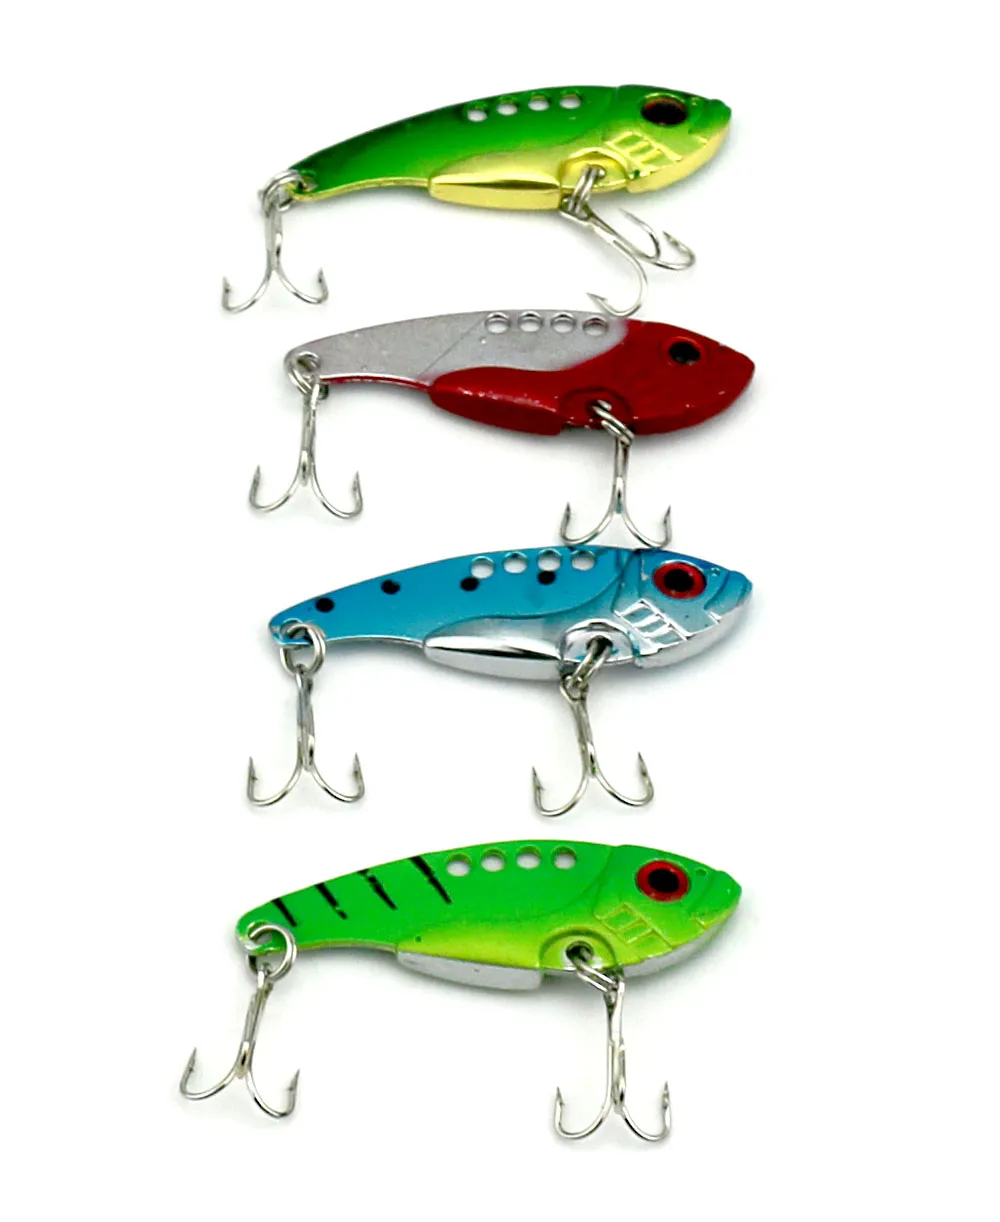 HENGJIA 11G Hard Bait Micro Fishing Lures Blade For Freshwater Bass,  Walleye, Crappie, And Minnow Metal VIB01244n Tackle From Rekqaq, $60.21